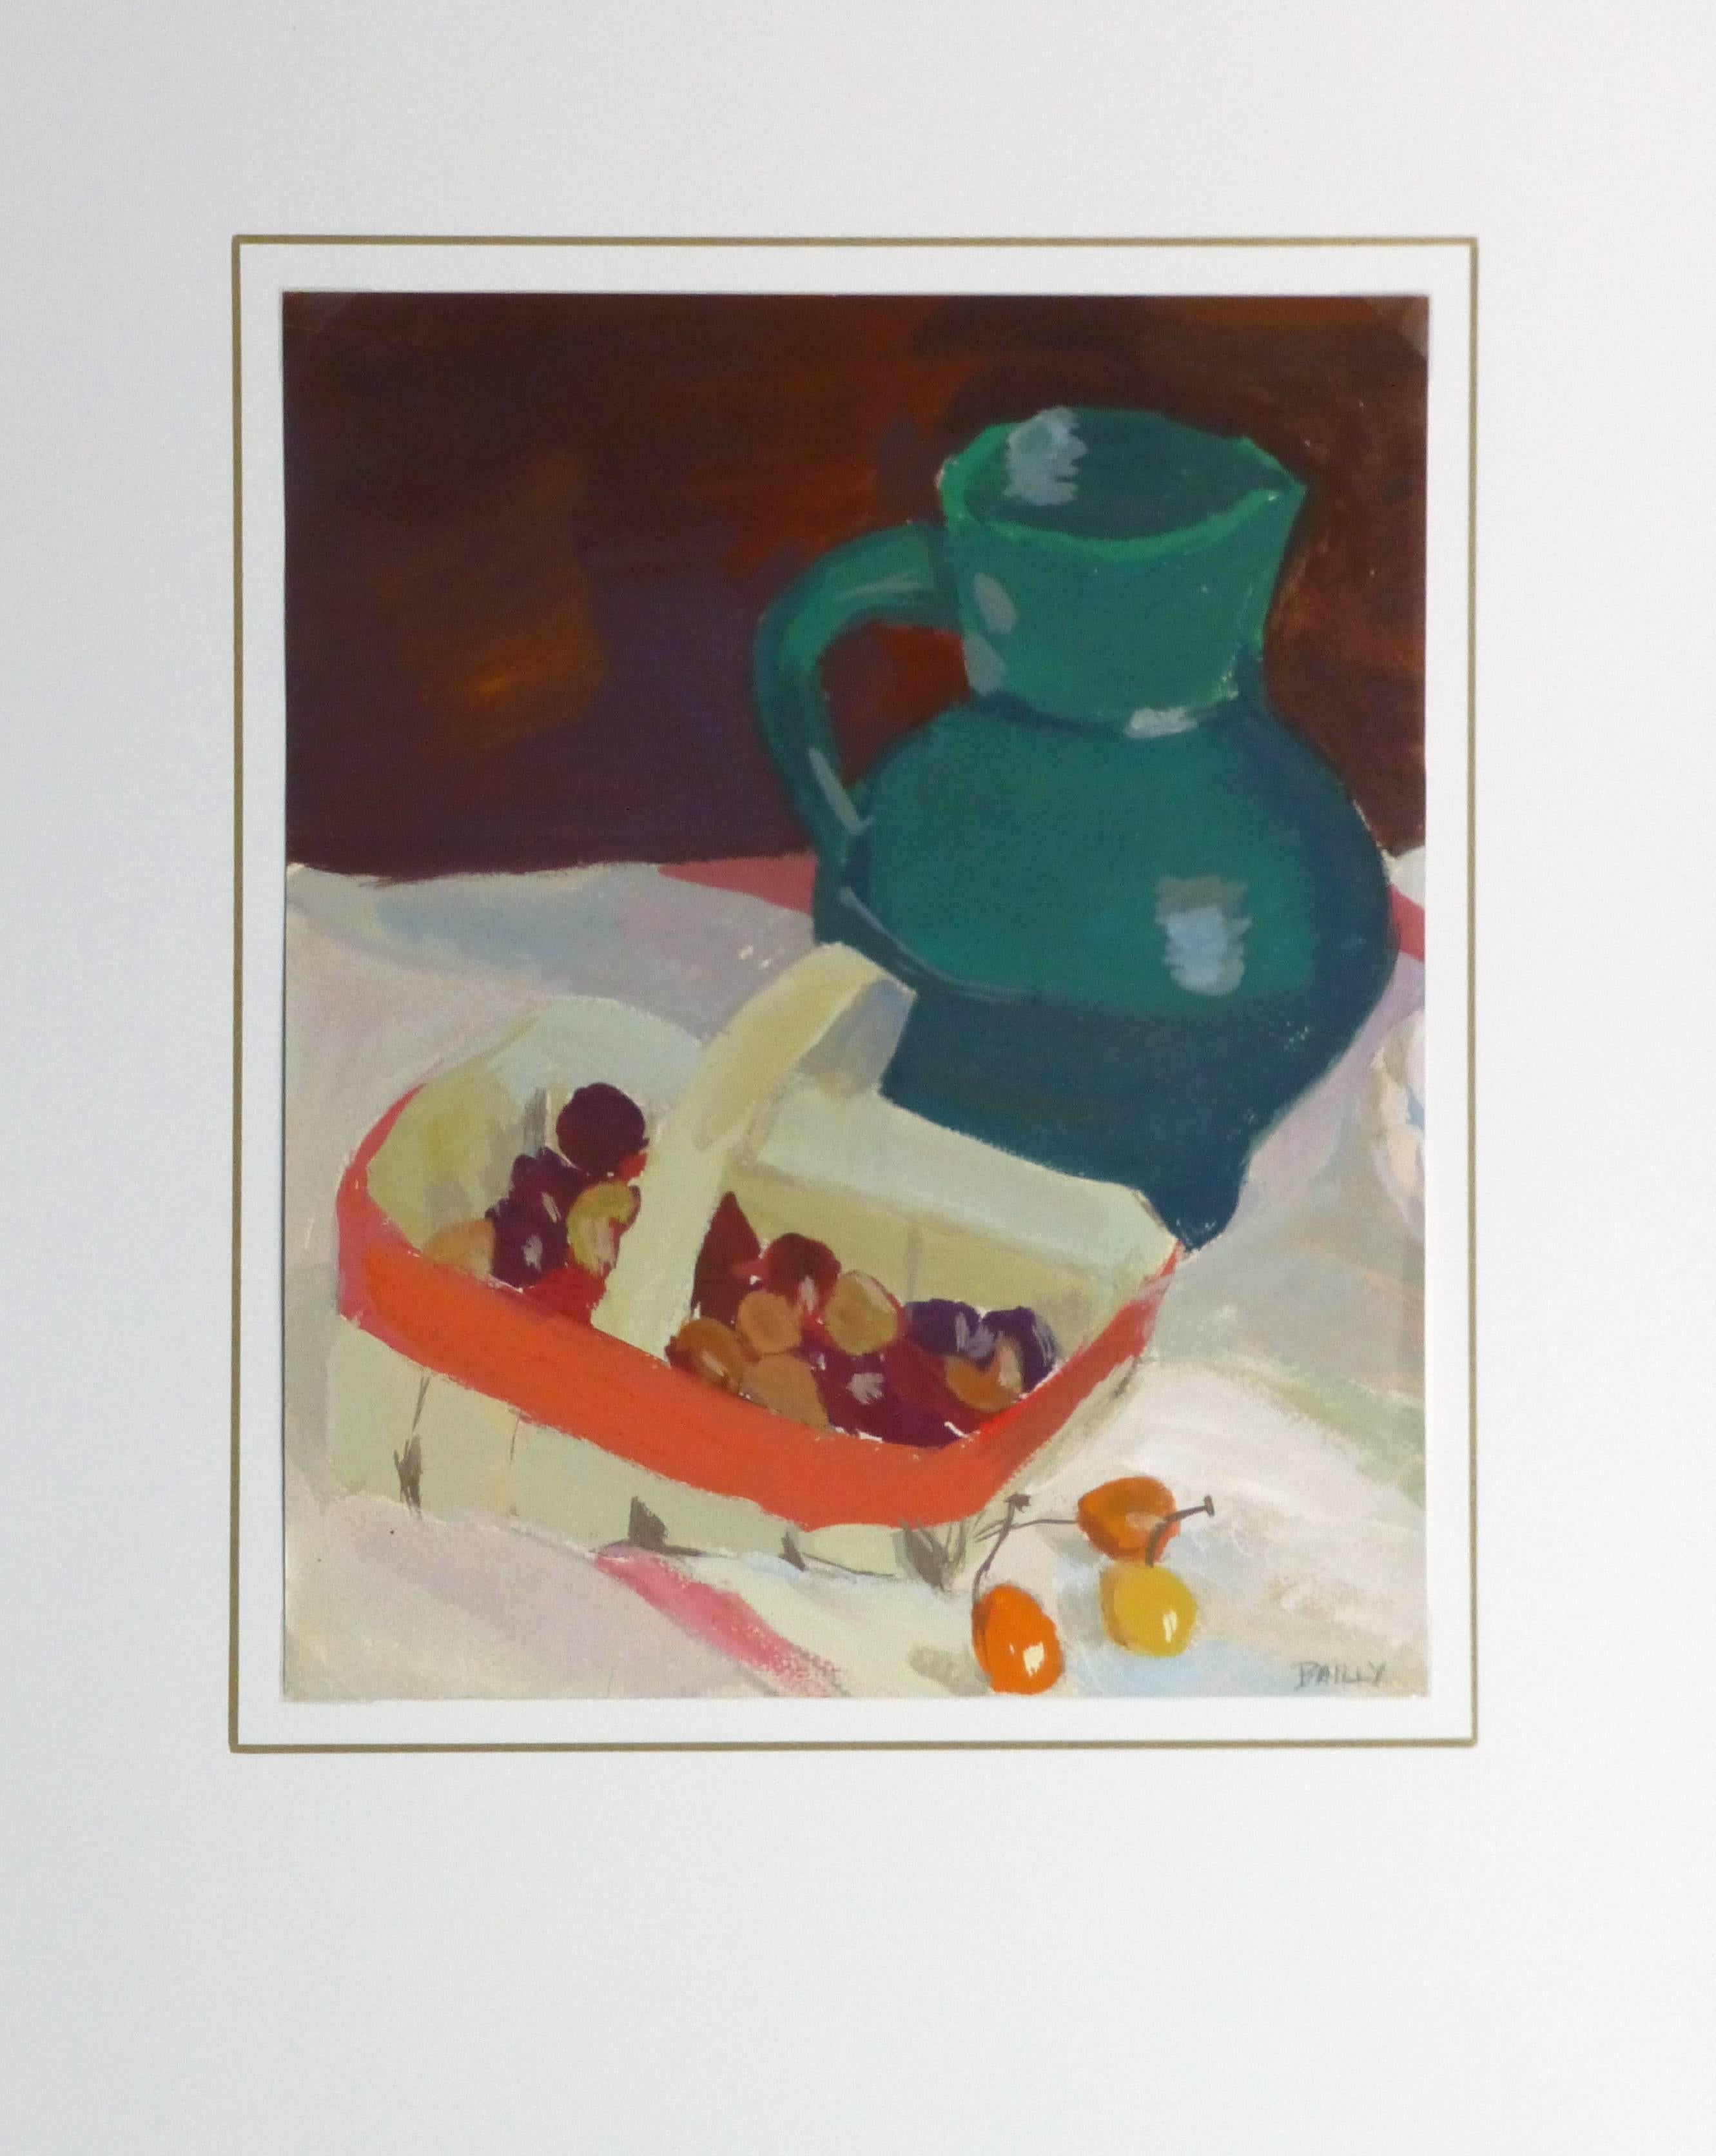 Richly-hued still life painting featuring a dark green pitcher and a basket of varicolored cherries, by French artist Raymond Bailly, circa 1950. Signed lower right. 

Original artwork on paper displayed on a white mat with a gold border. Archival